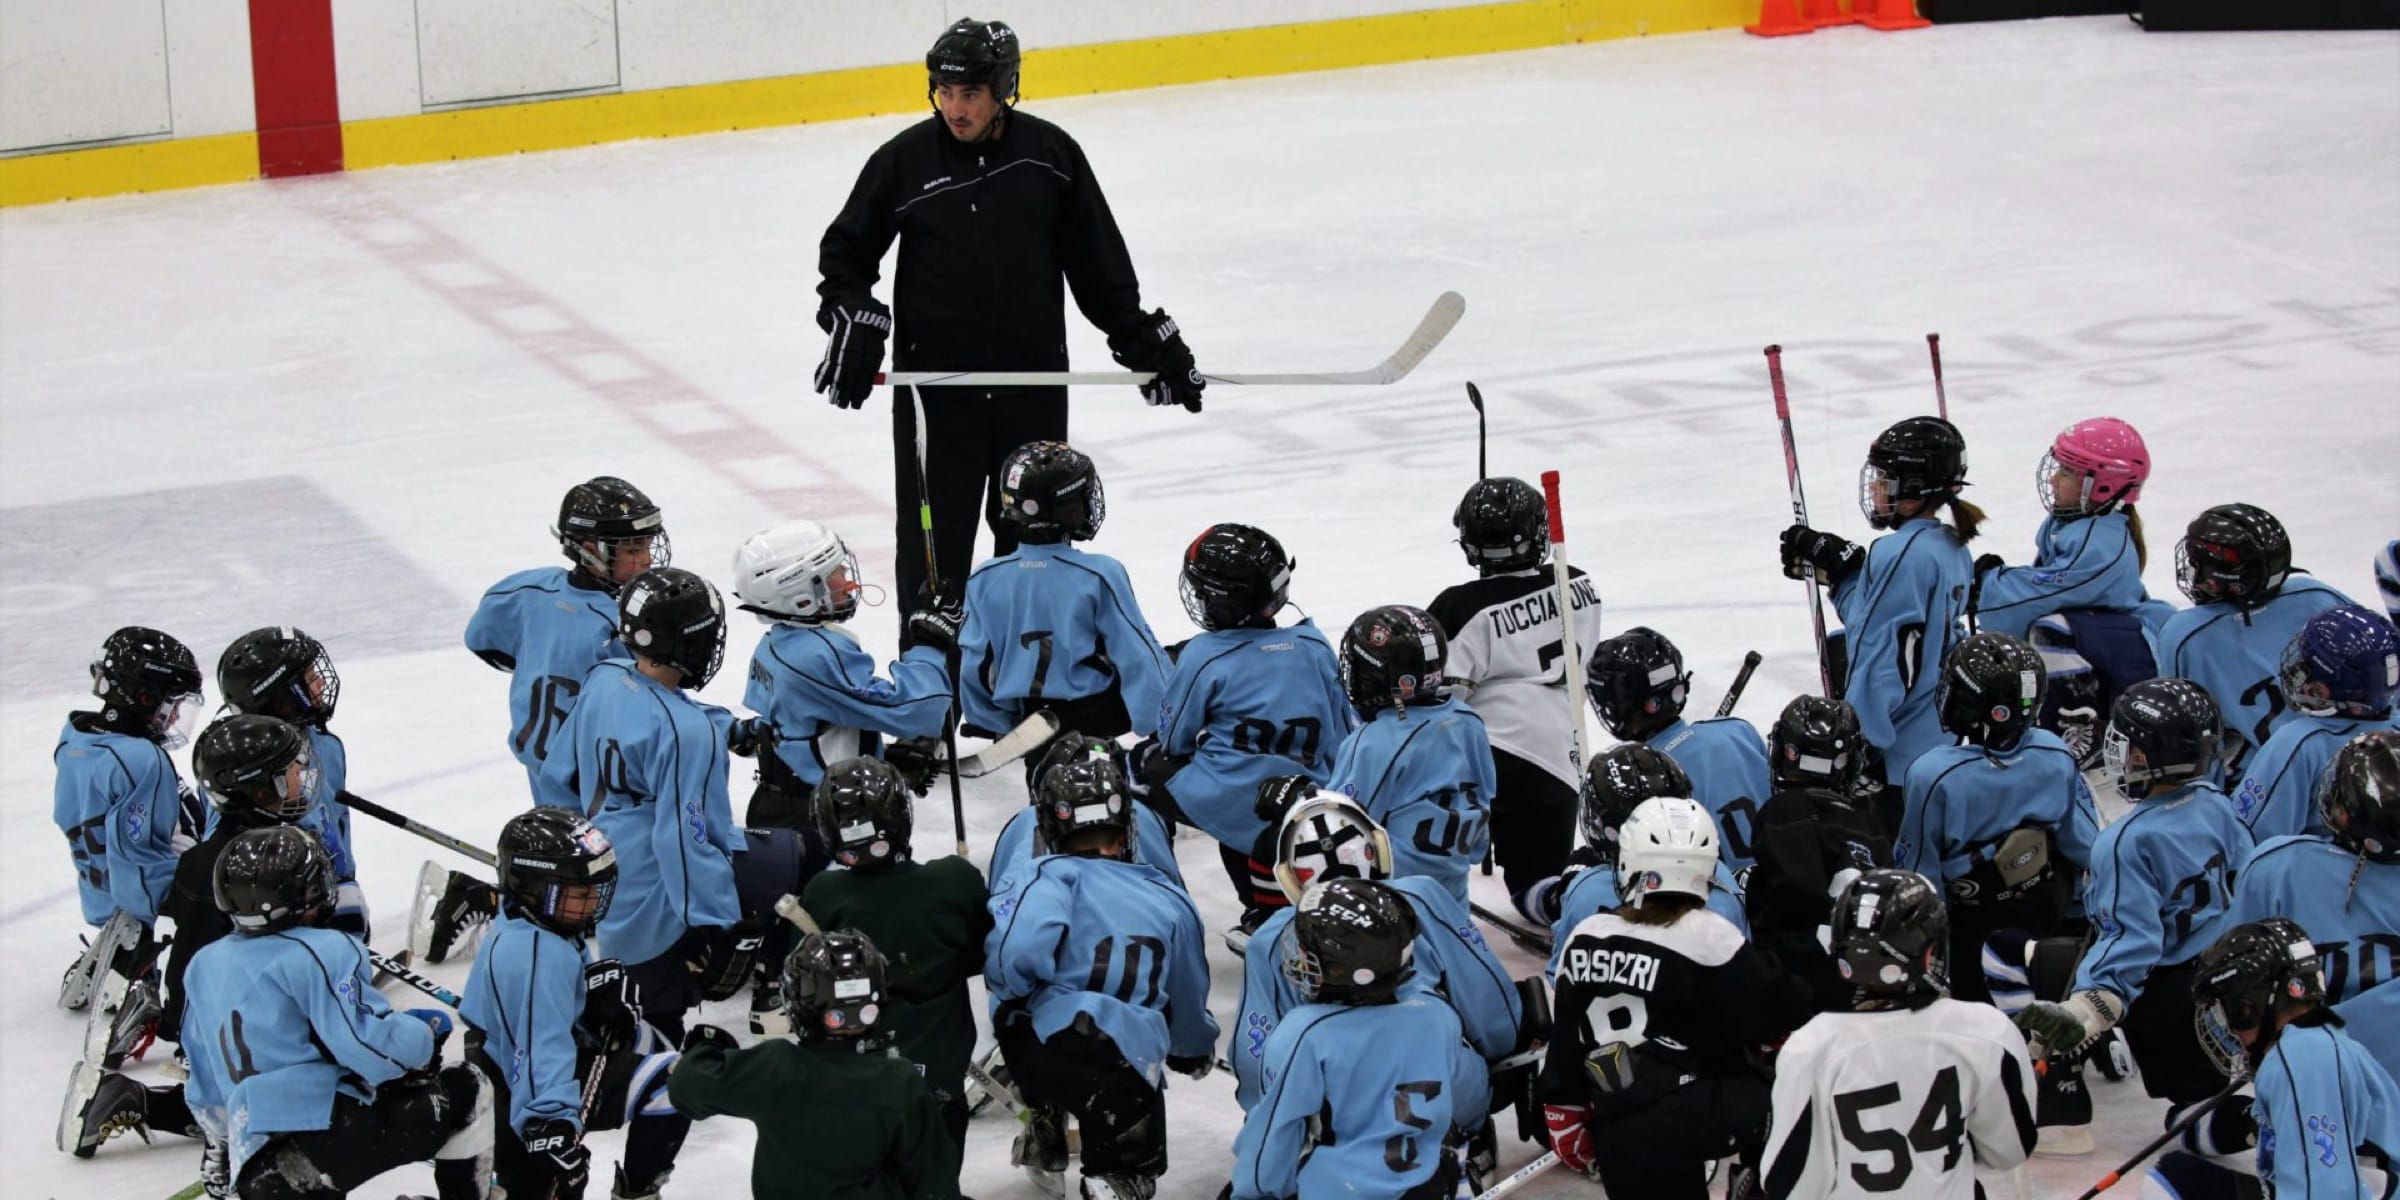 a person coaching some young hockey players